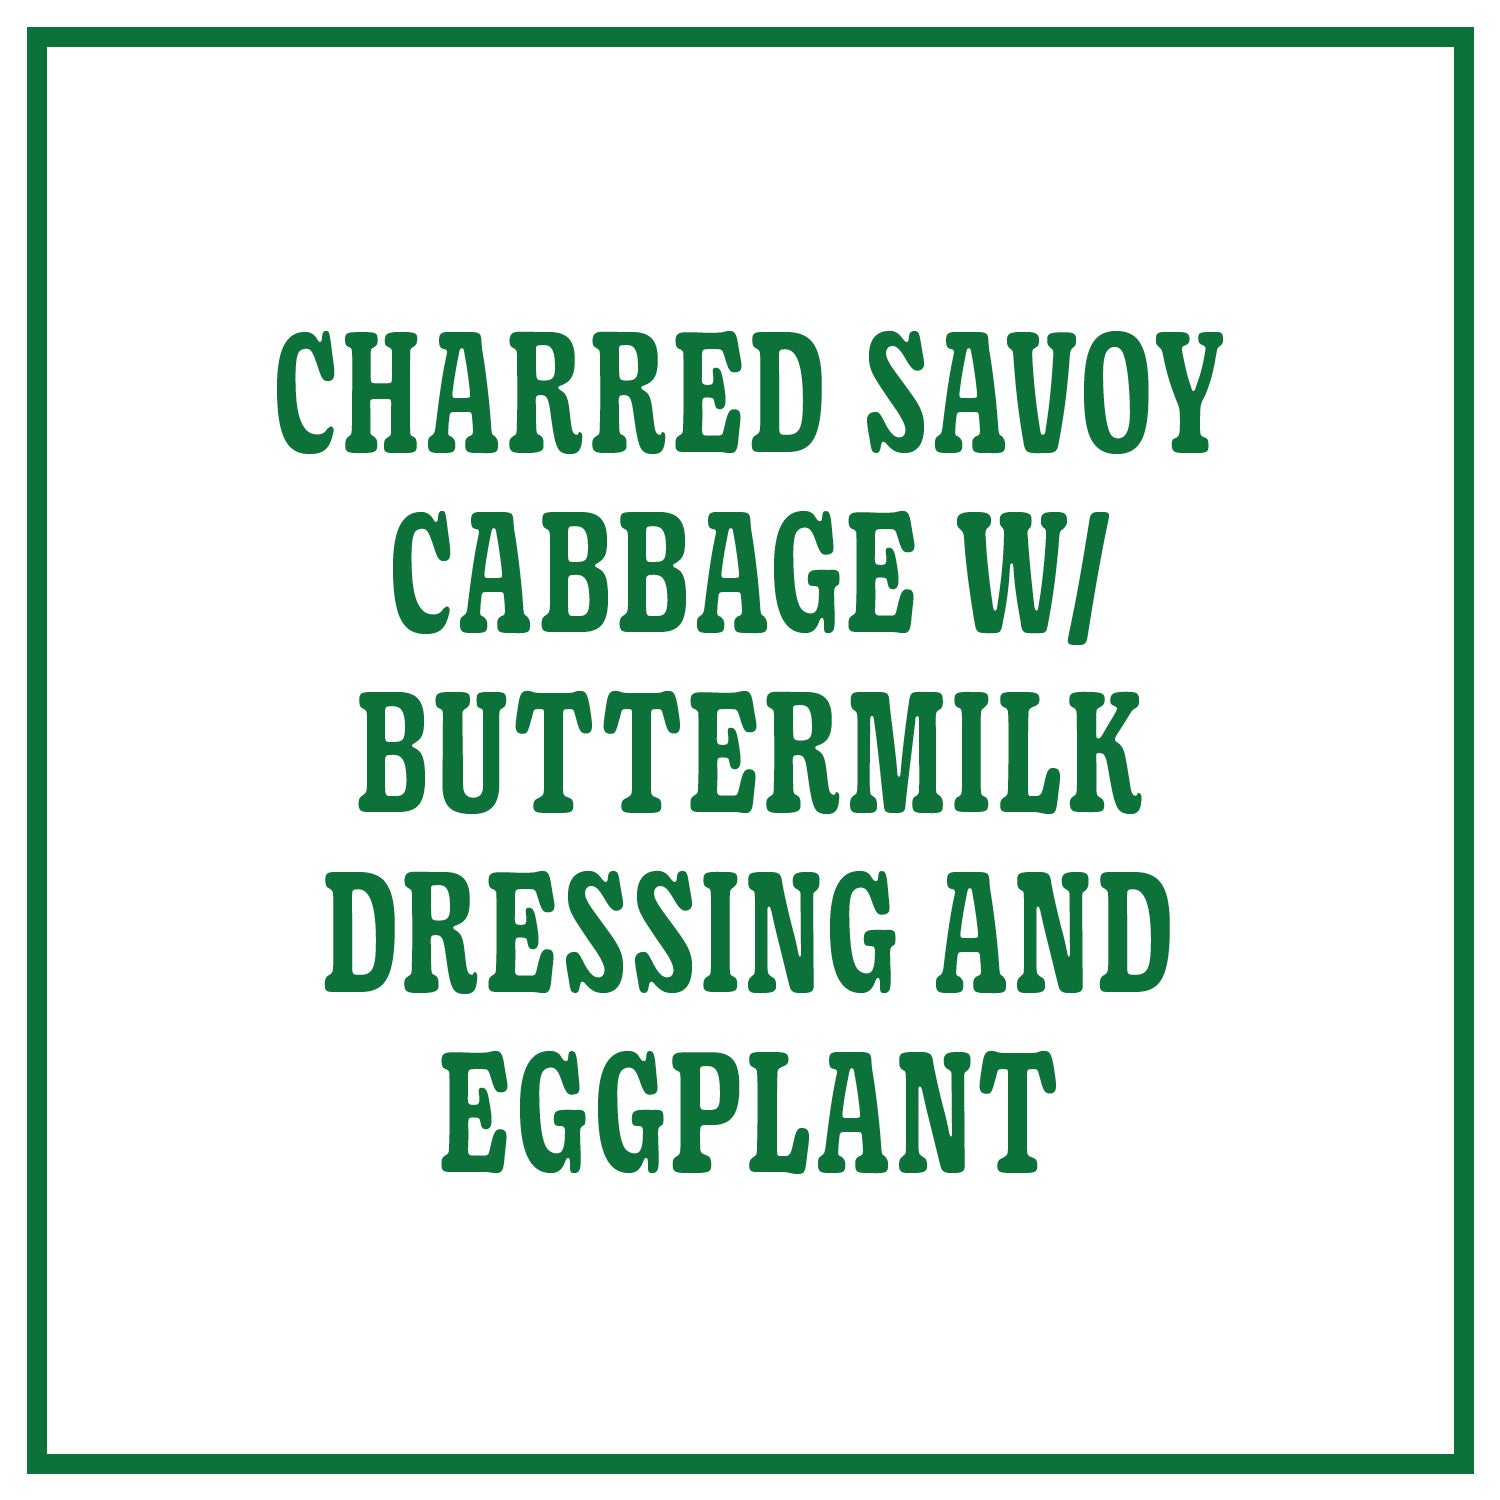 Charred Savoy Cabbage with Buttermilk Dressing and Eggplant